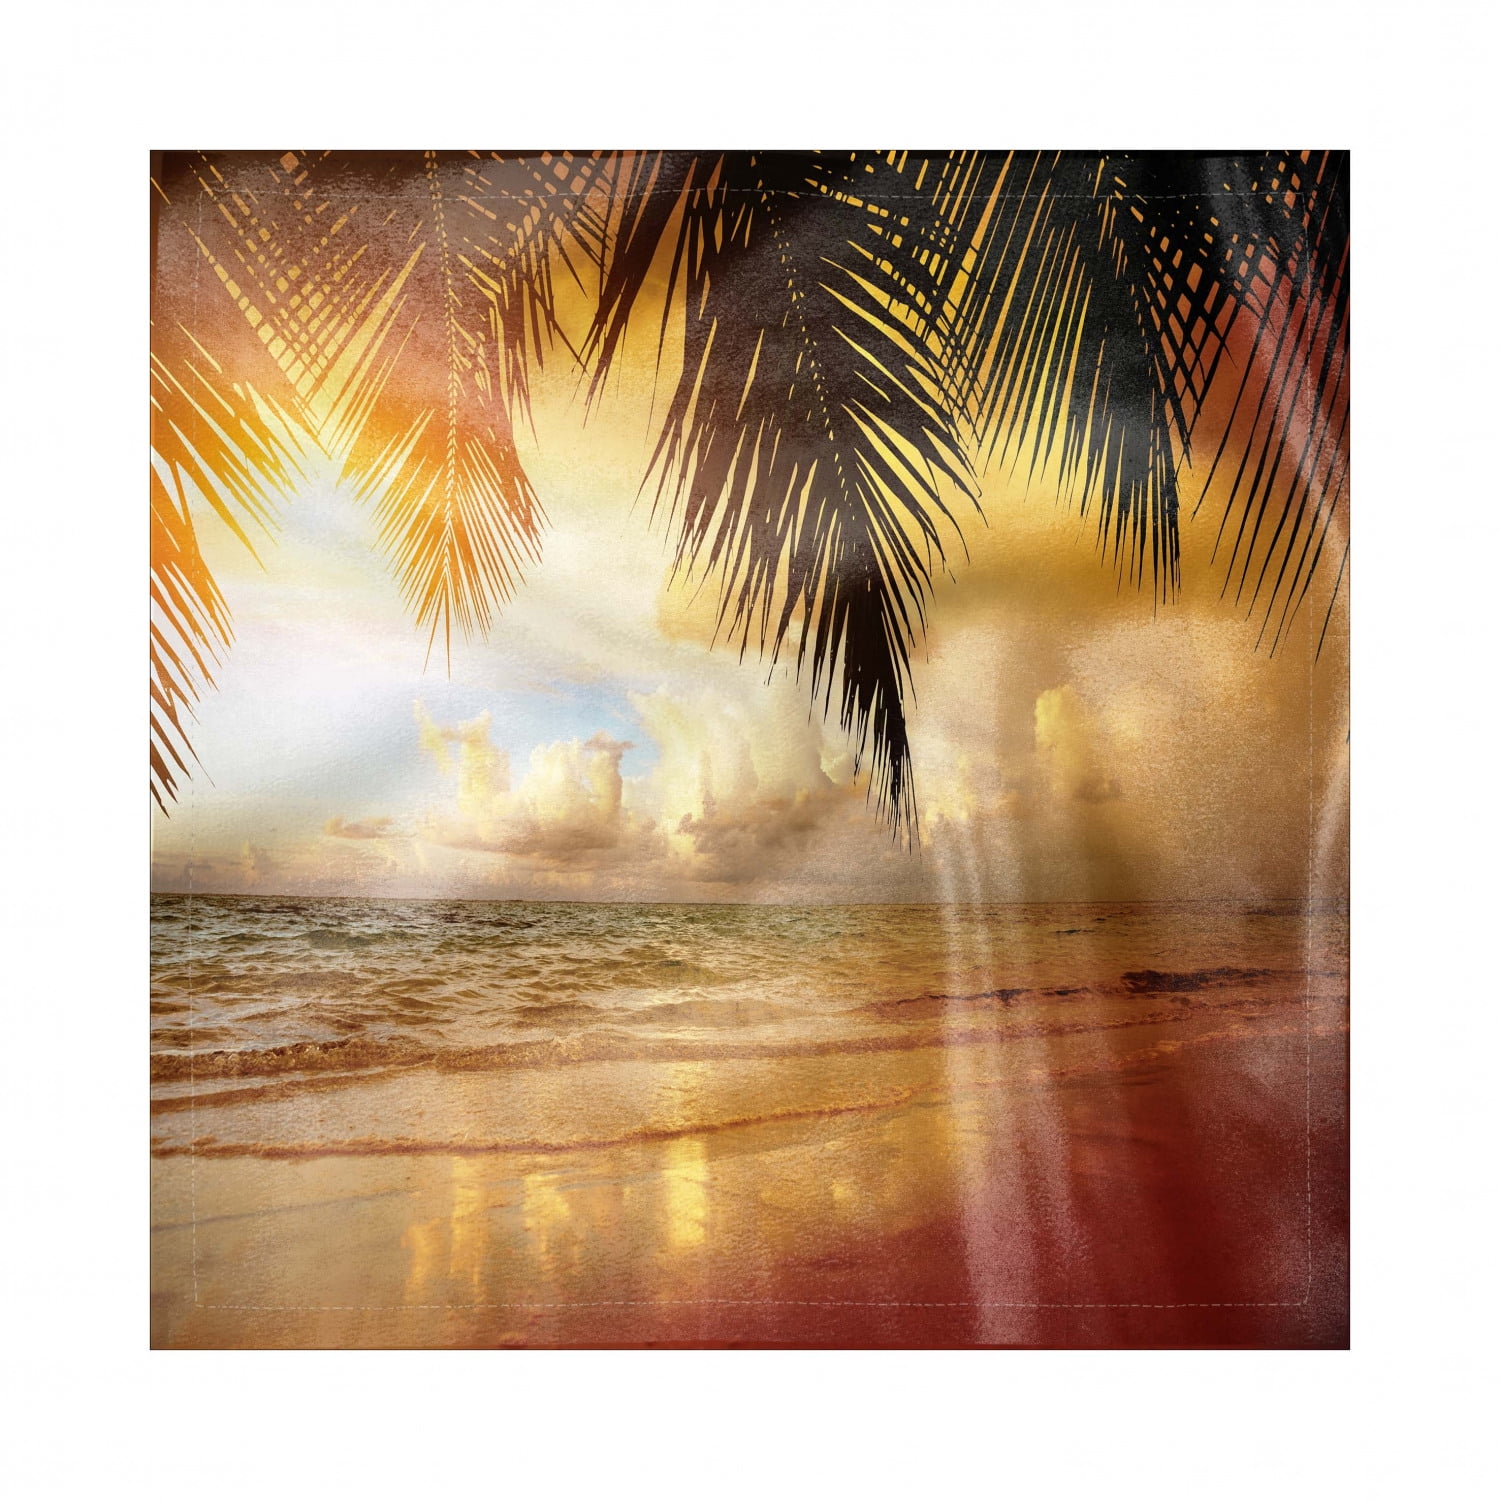 Standard Size Exotic Landscape Photo of Tropical Tall Palm Tree Silhouette and Ocean at Dawn Ambesonne Sunset Place Mats Set of 4 Multicolor Washable Fabric Placemats for Dining Table